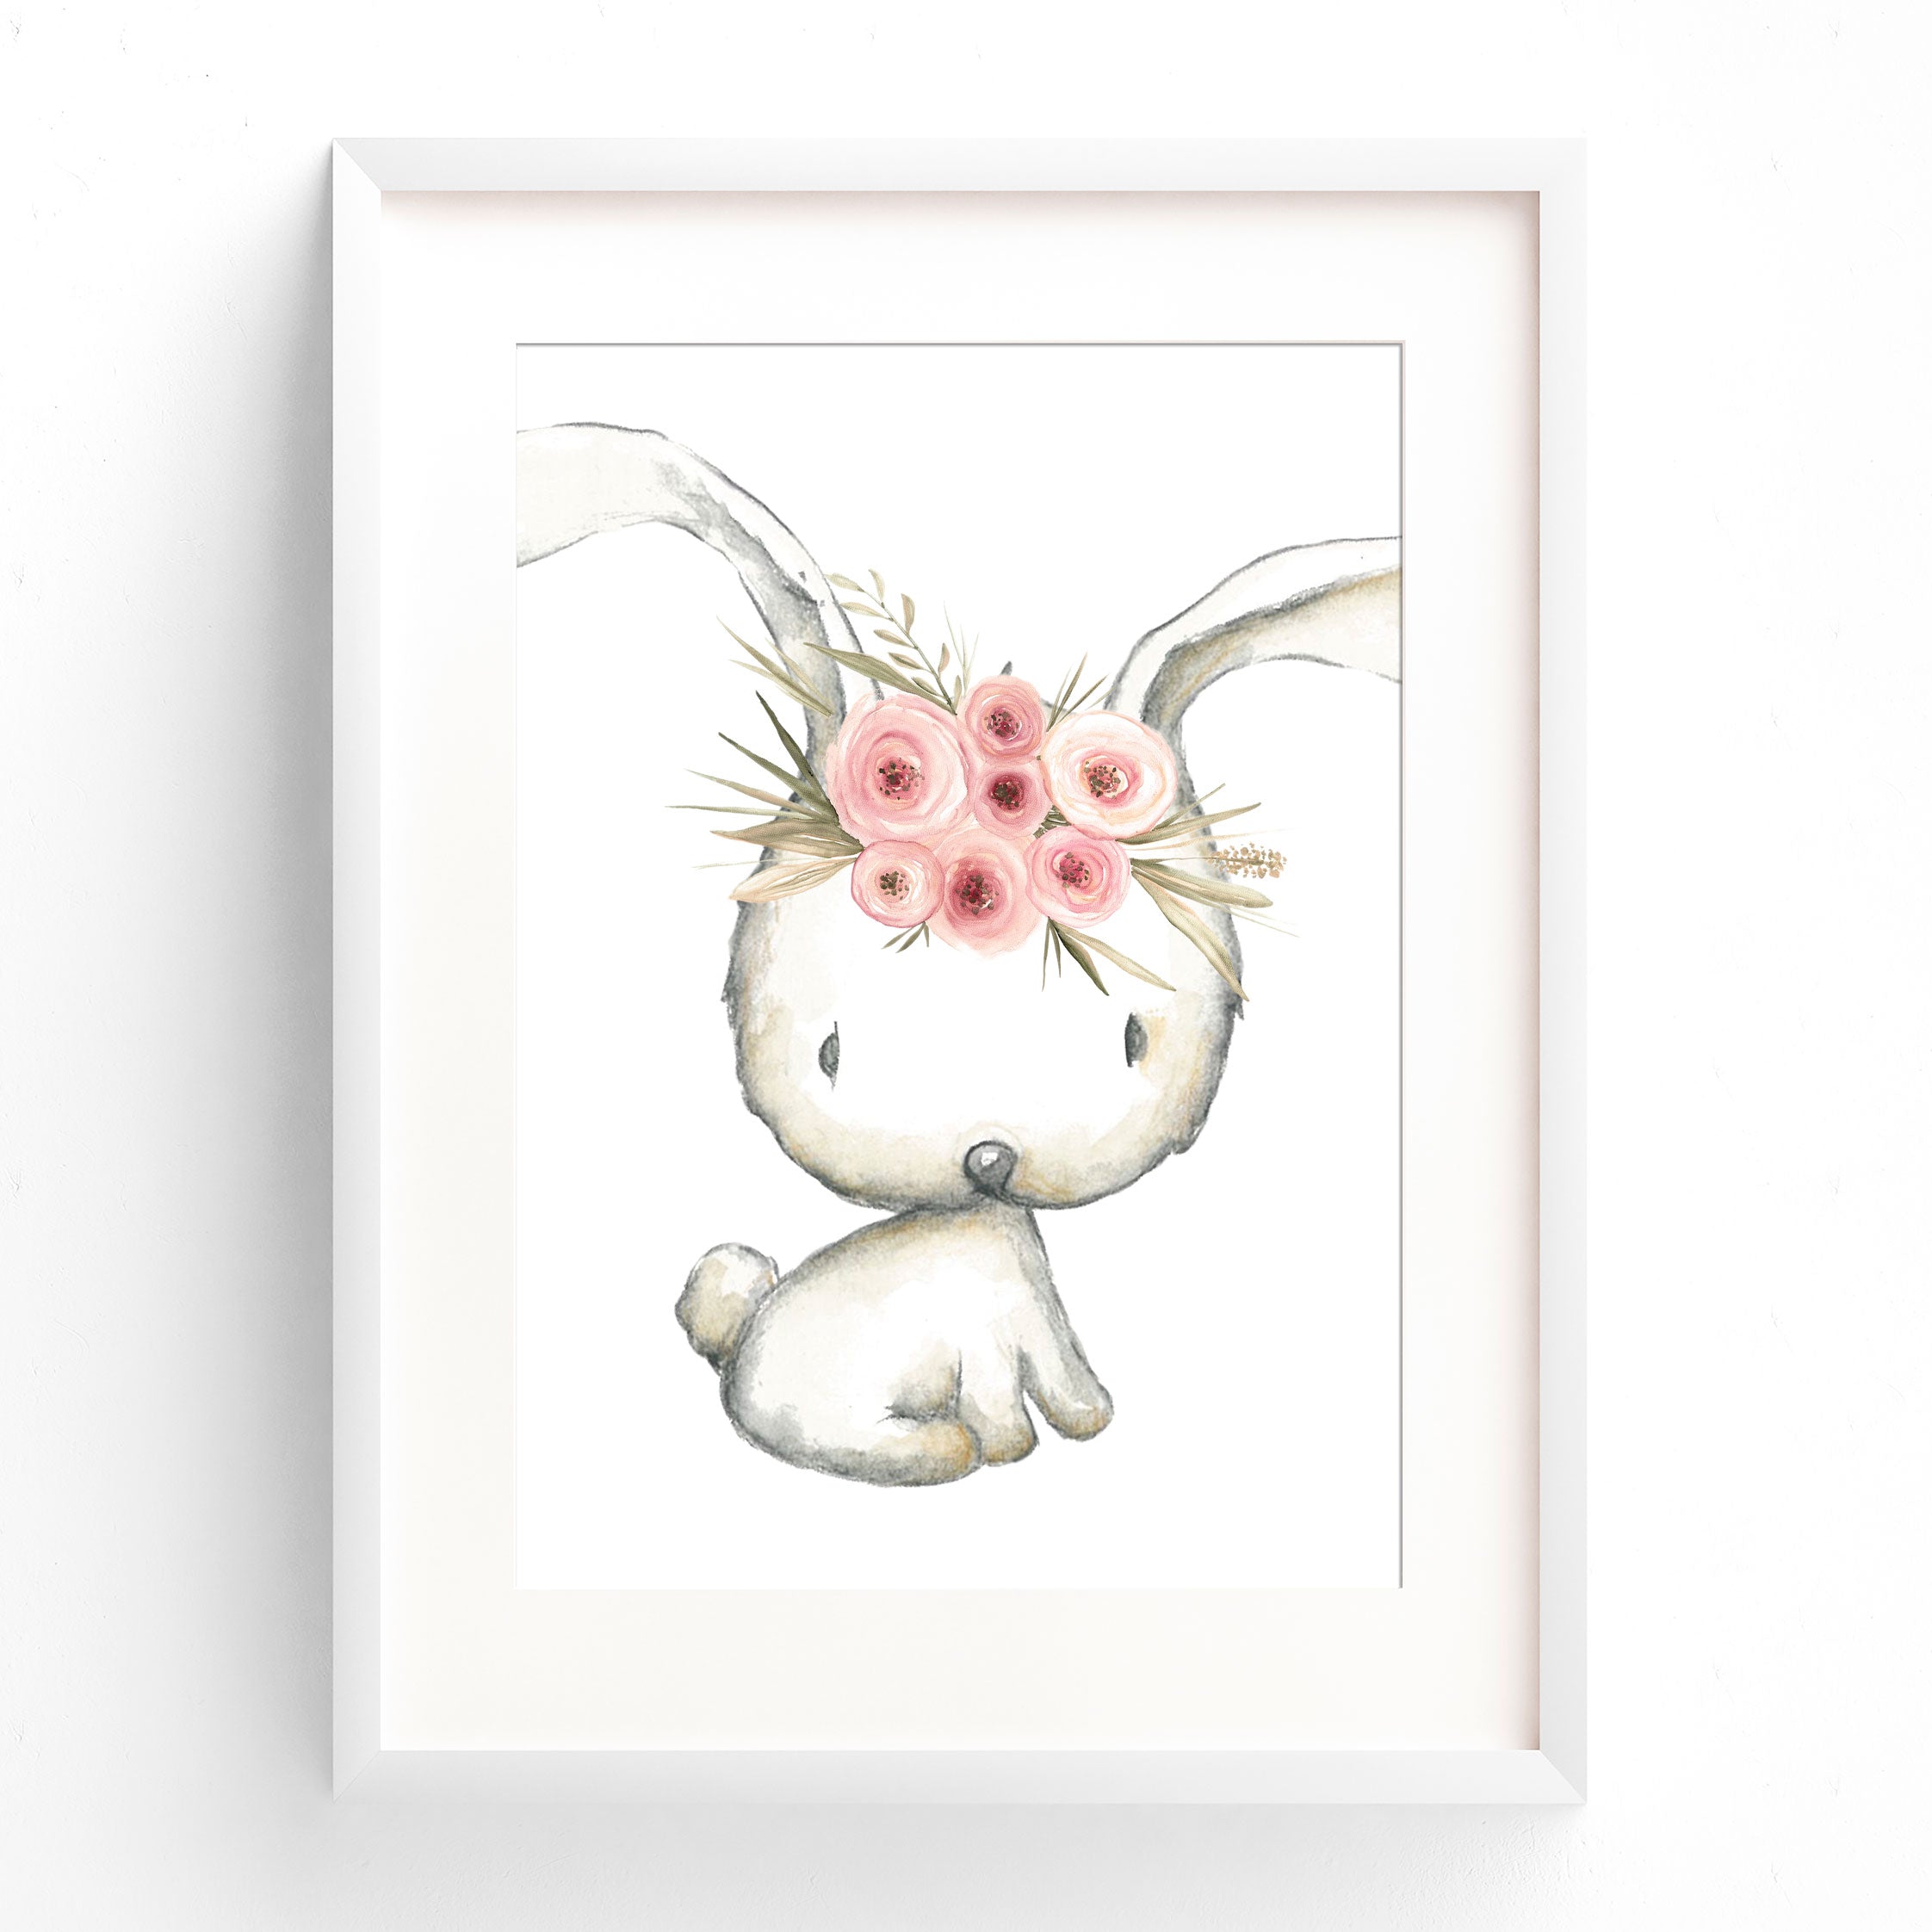 Woodland Floral Bunnies & Quote Prints